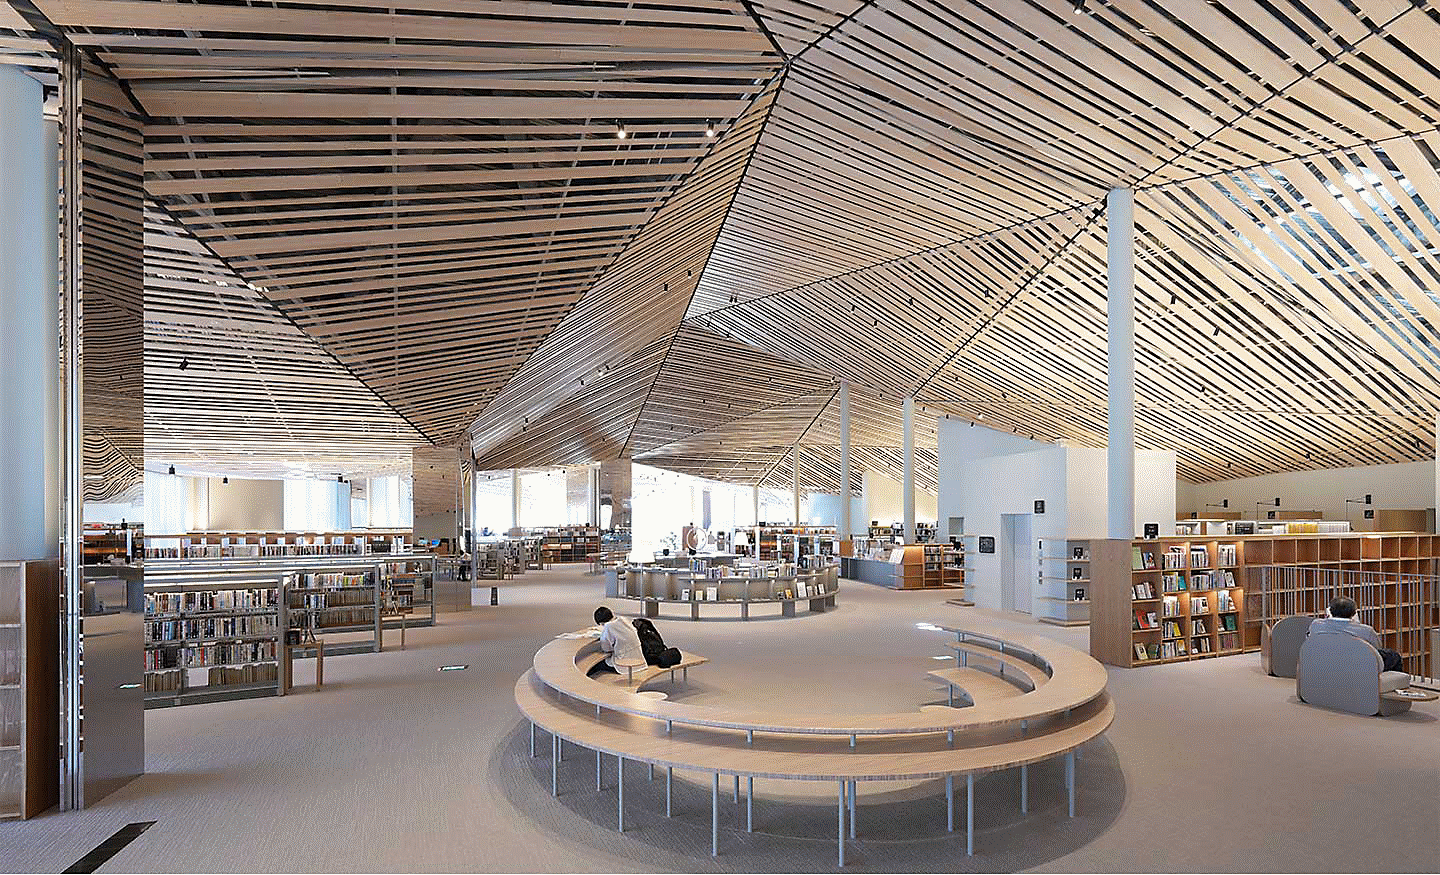 Image of the interior space of a large library with an elaborate design using many straight wood planks on the ceiling, with resolution to every corner of the screen